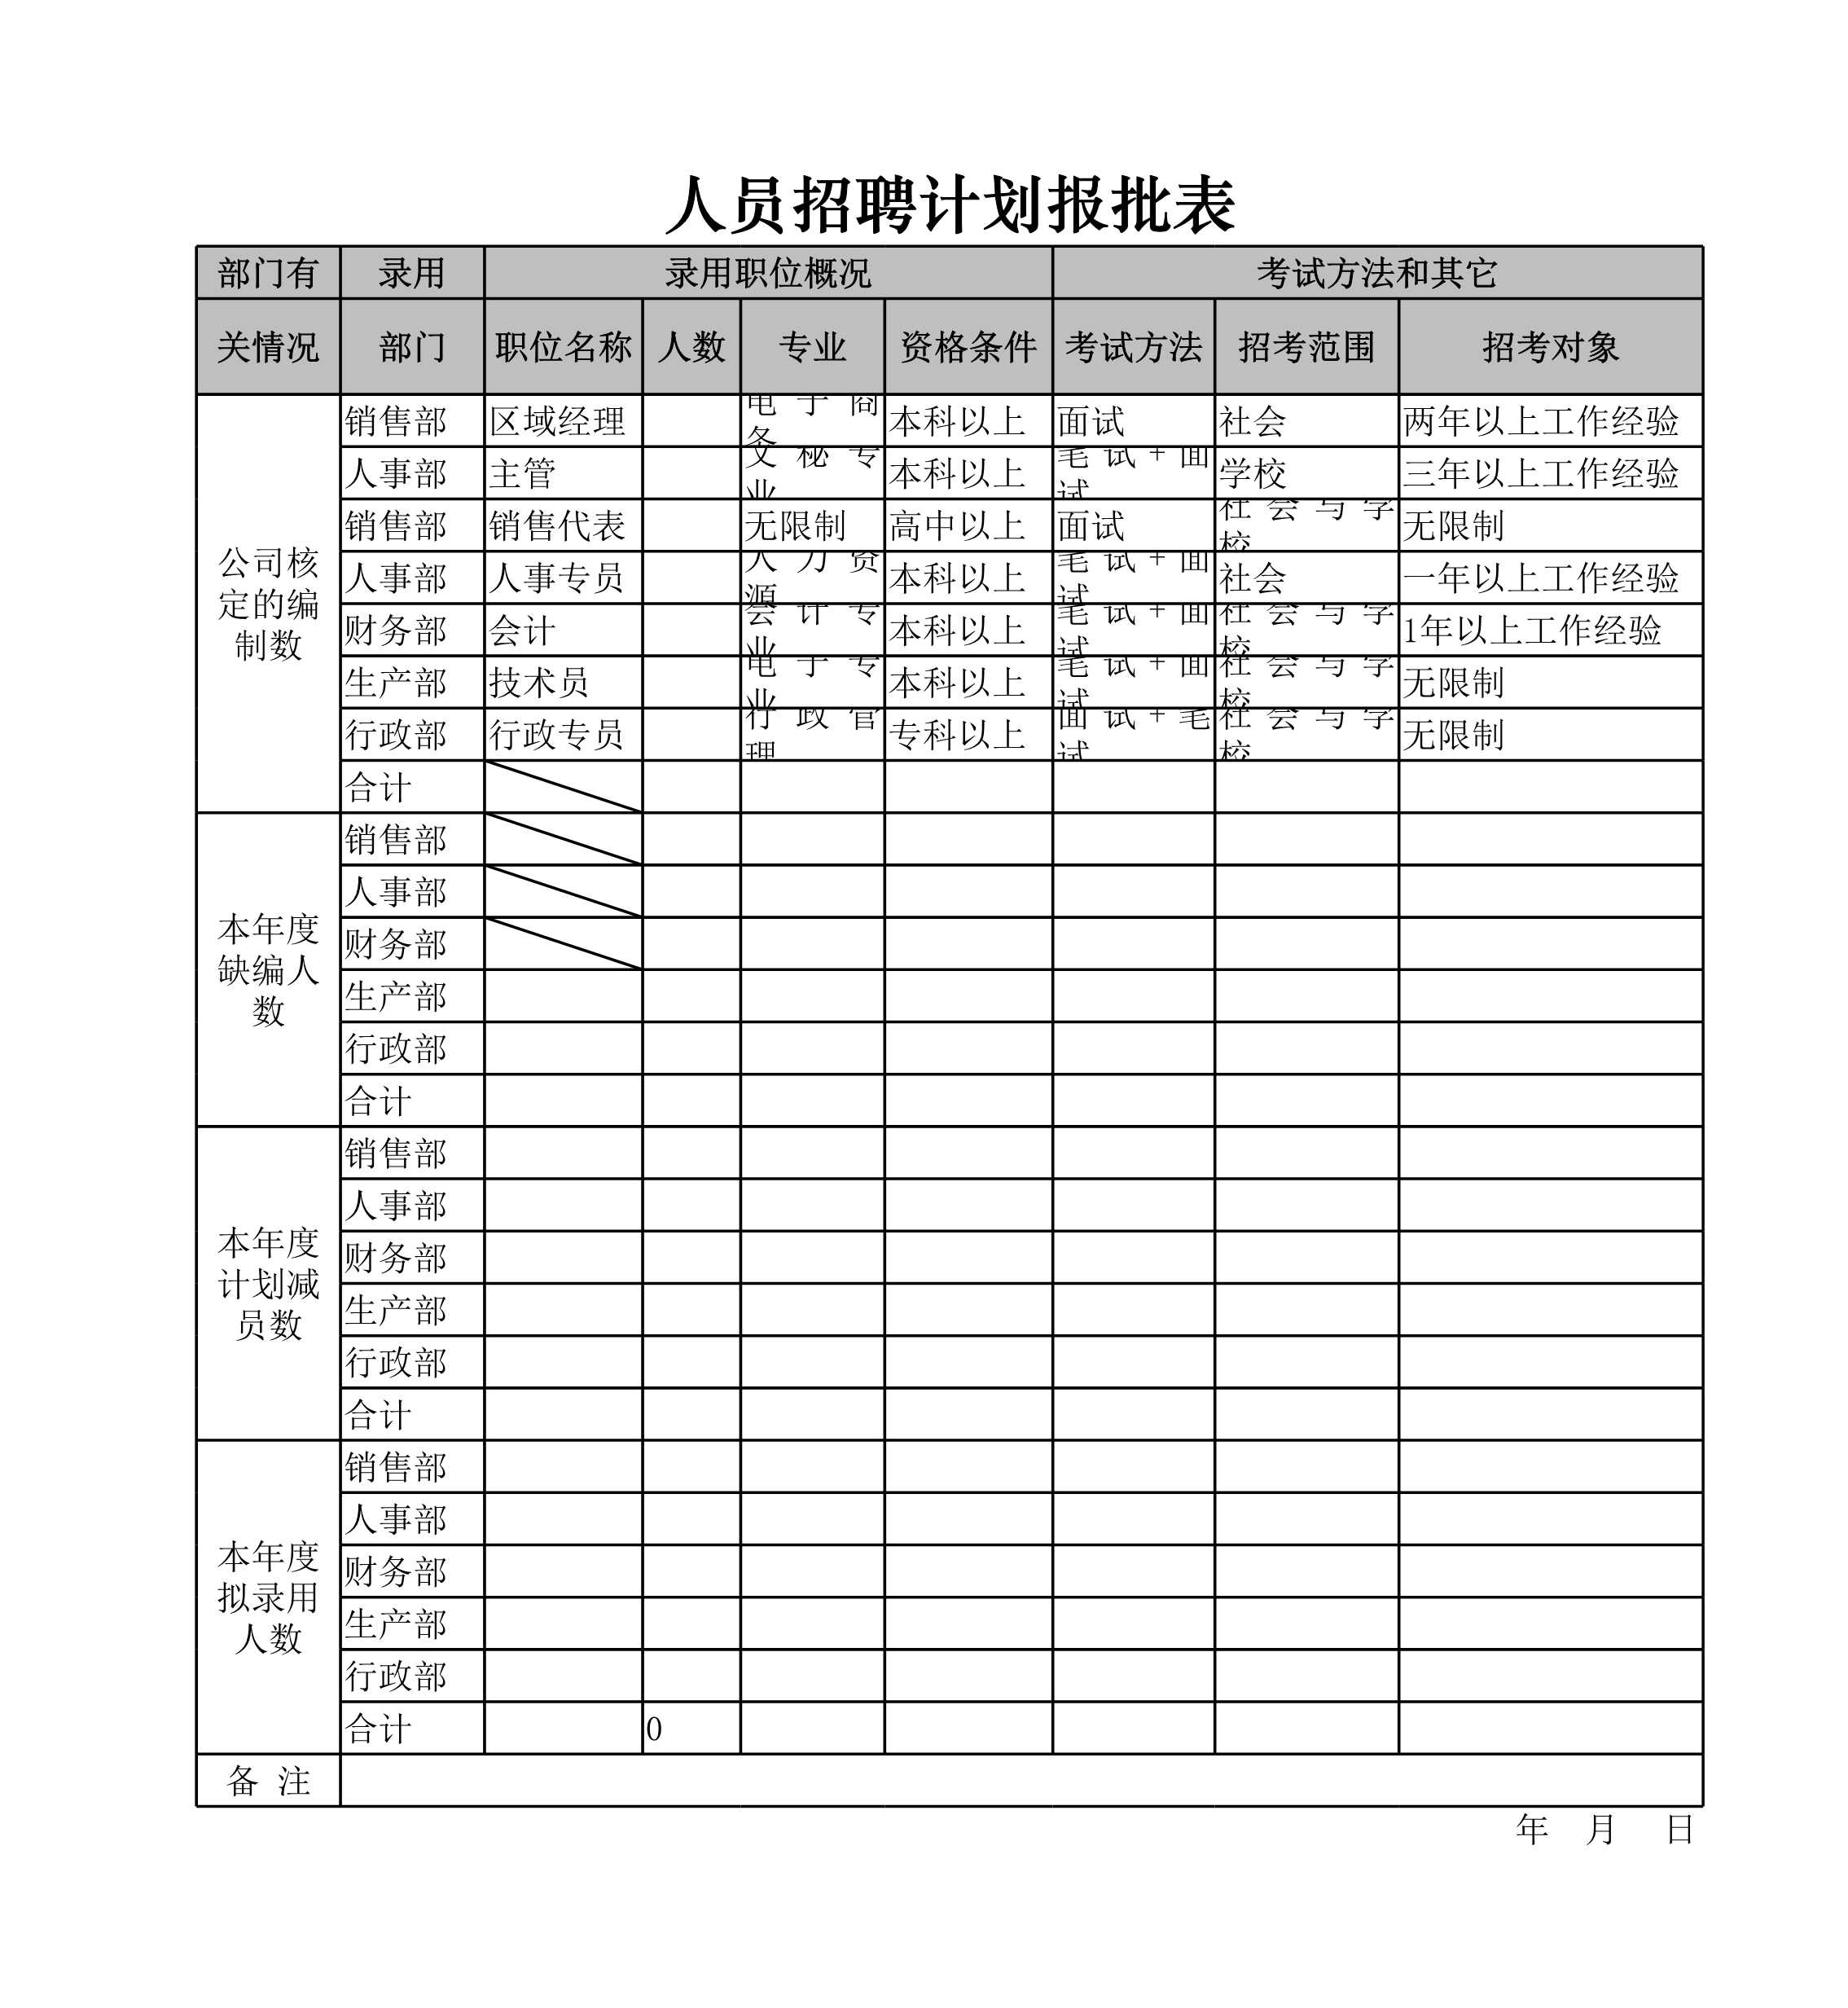 Excle模板_Excle表格样本模板免费下载